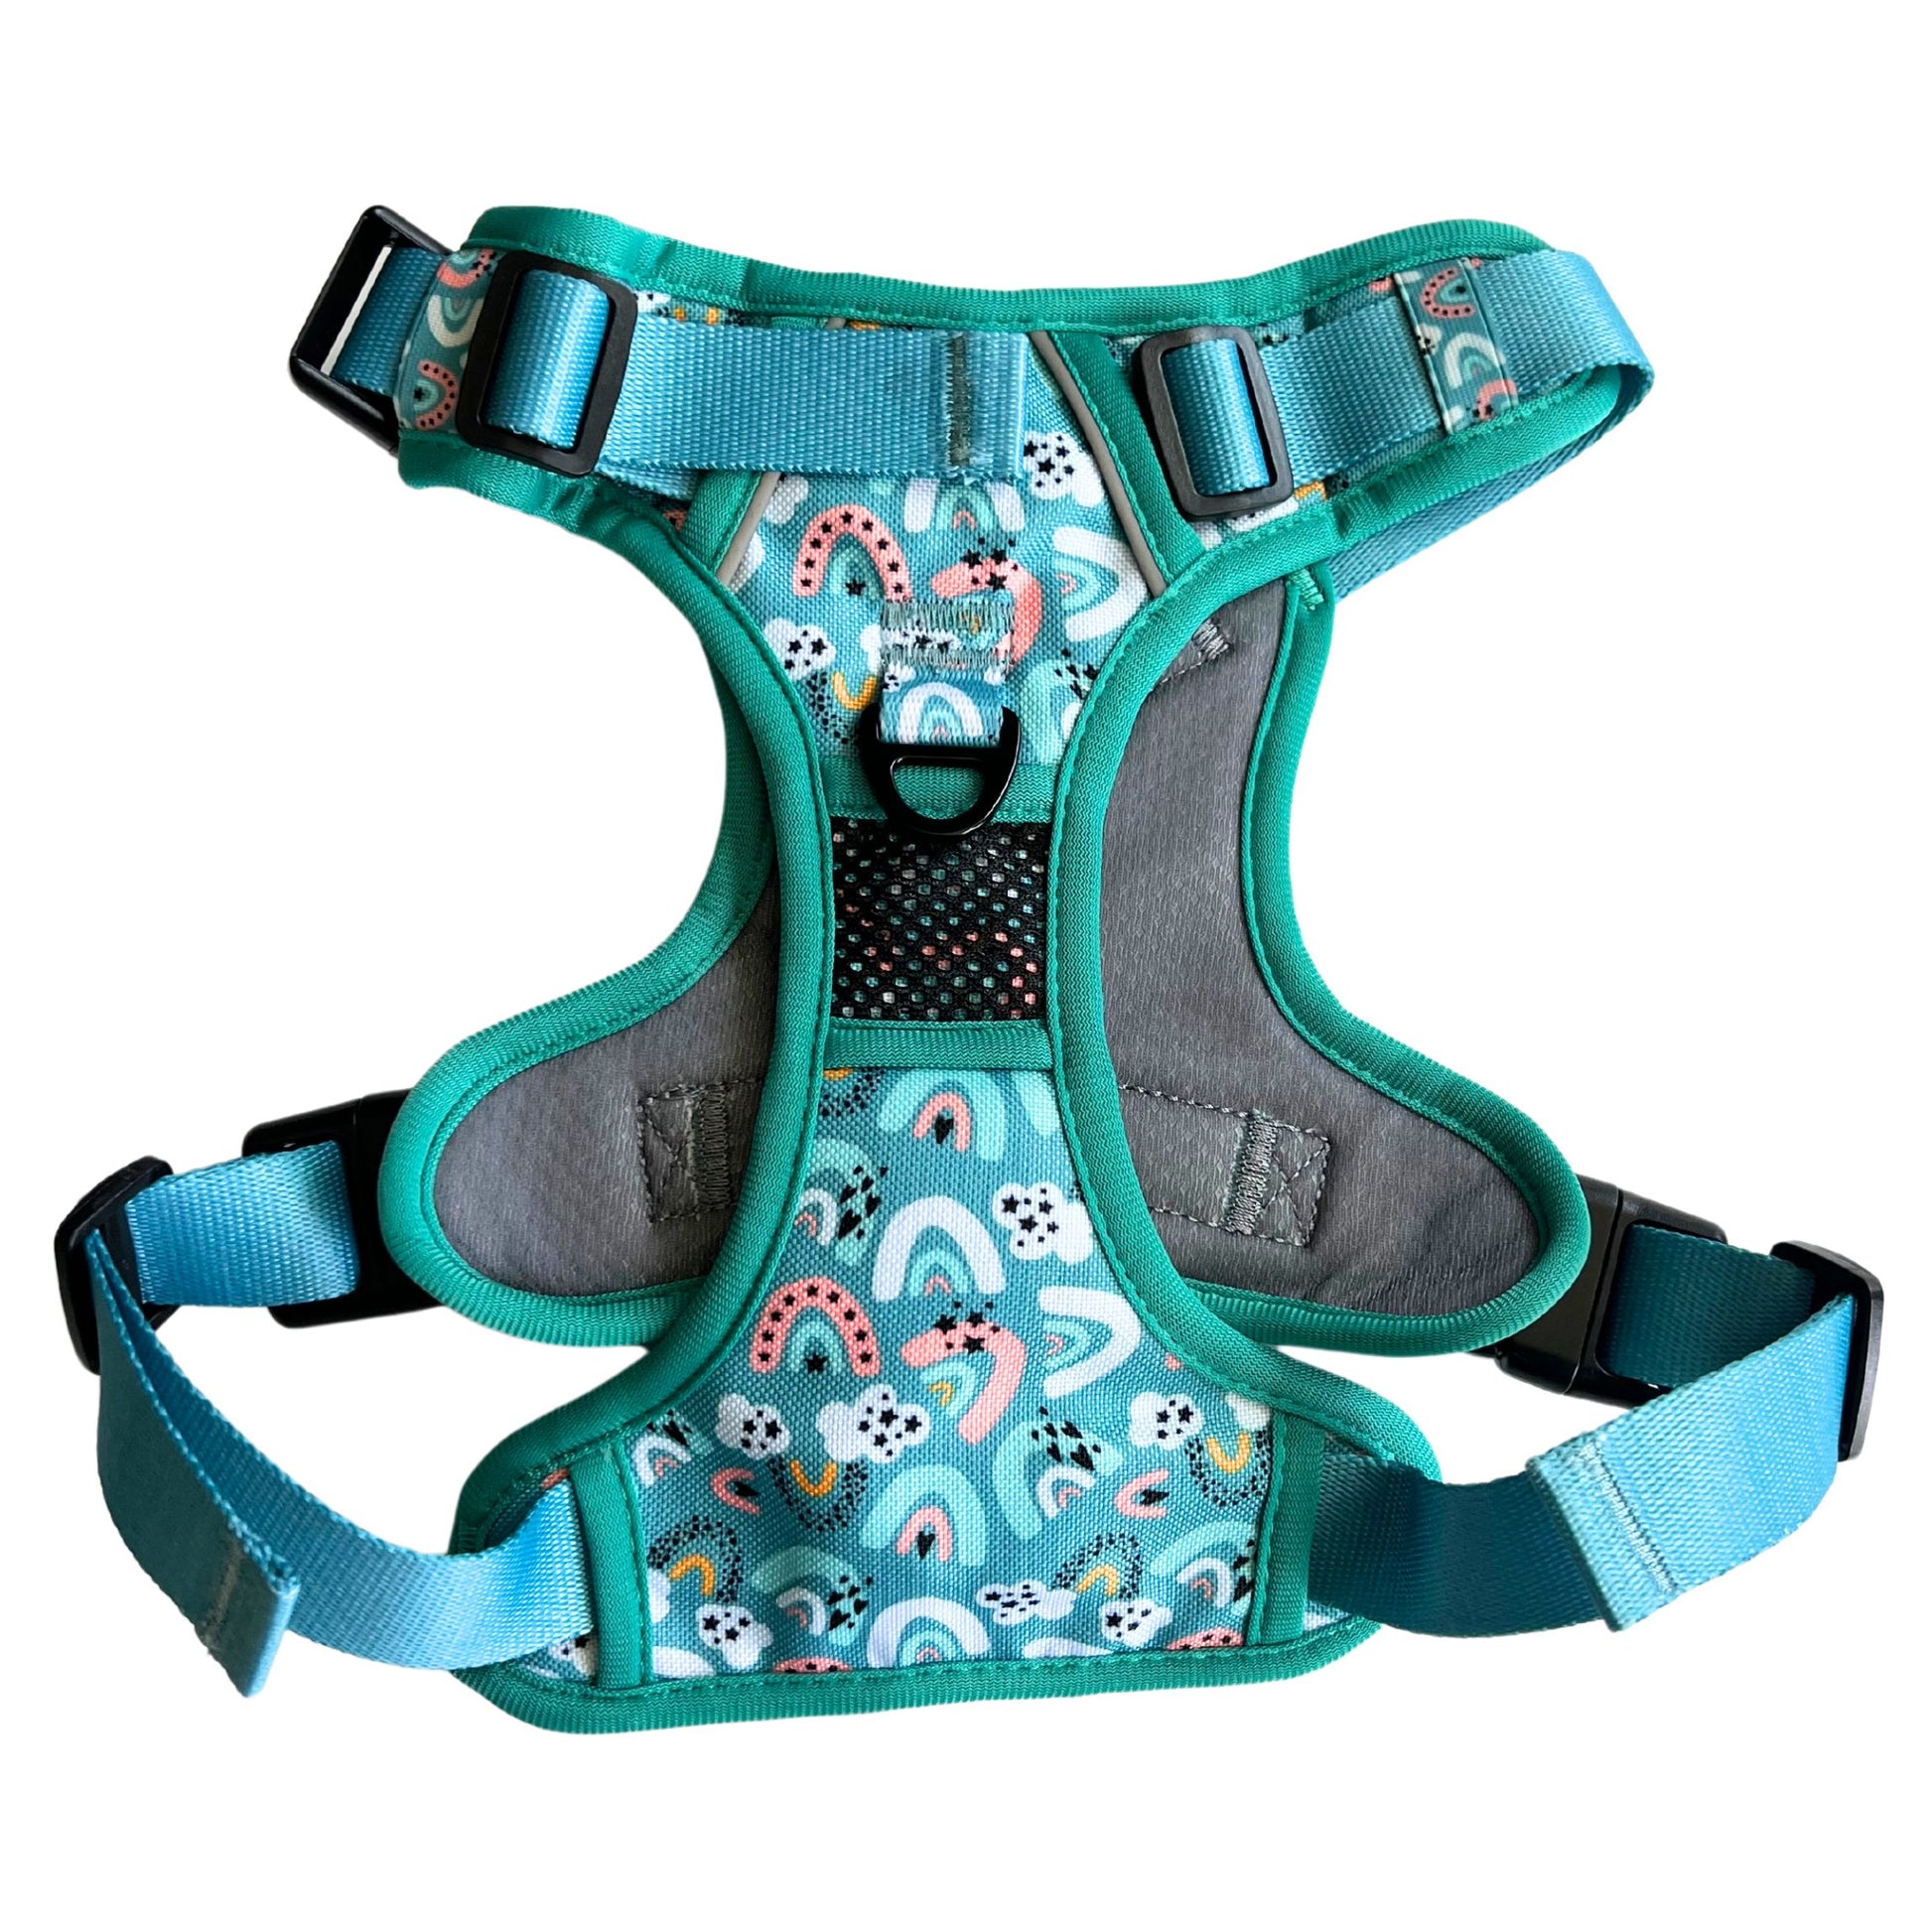 harness for bull dogs, harness for pit bull, harness for frenchies, harness for small dogs, cute dog harness, cute dog harness for puppy, blue harness, pink harness, no pull dog harness, escape proof dog harness, harness for dog training, vest for dogs, durable dog harness, adjustable dog harness, 